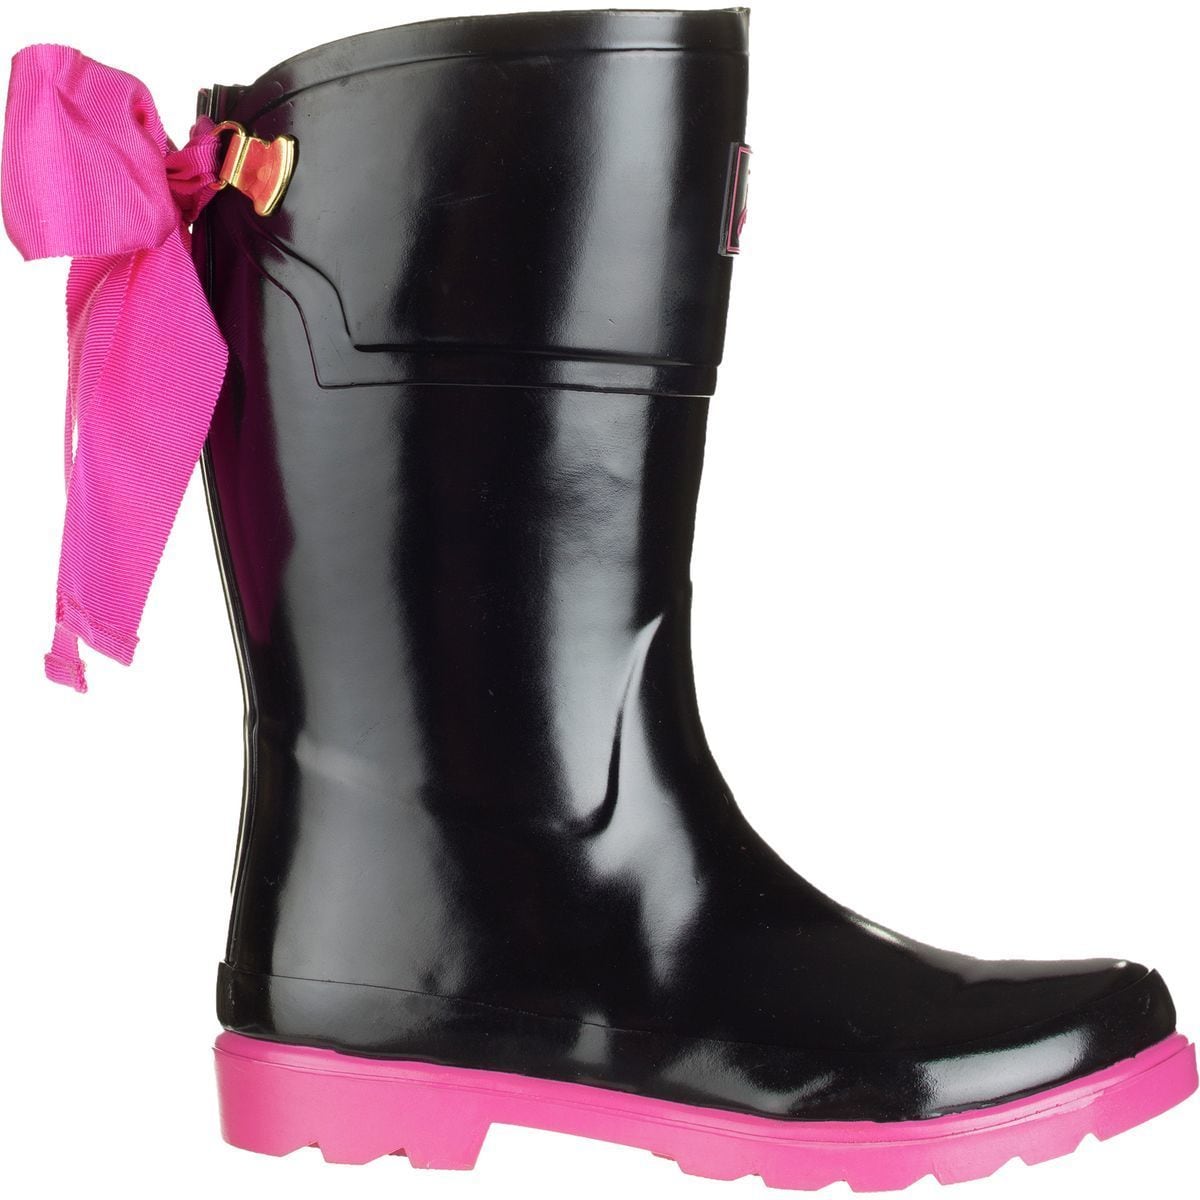 Joules Kids Jnr Bow Welly Rain Boot 